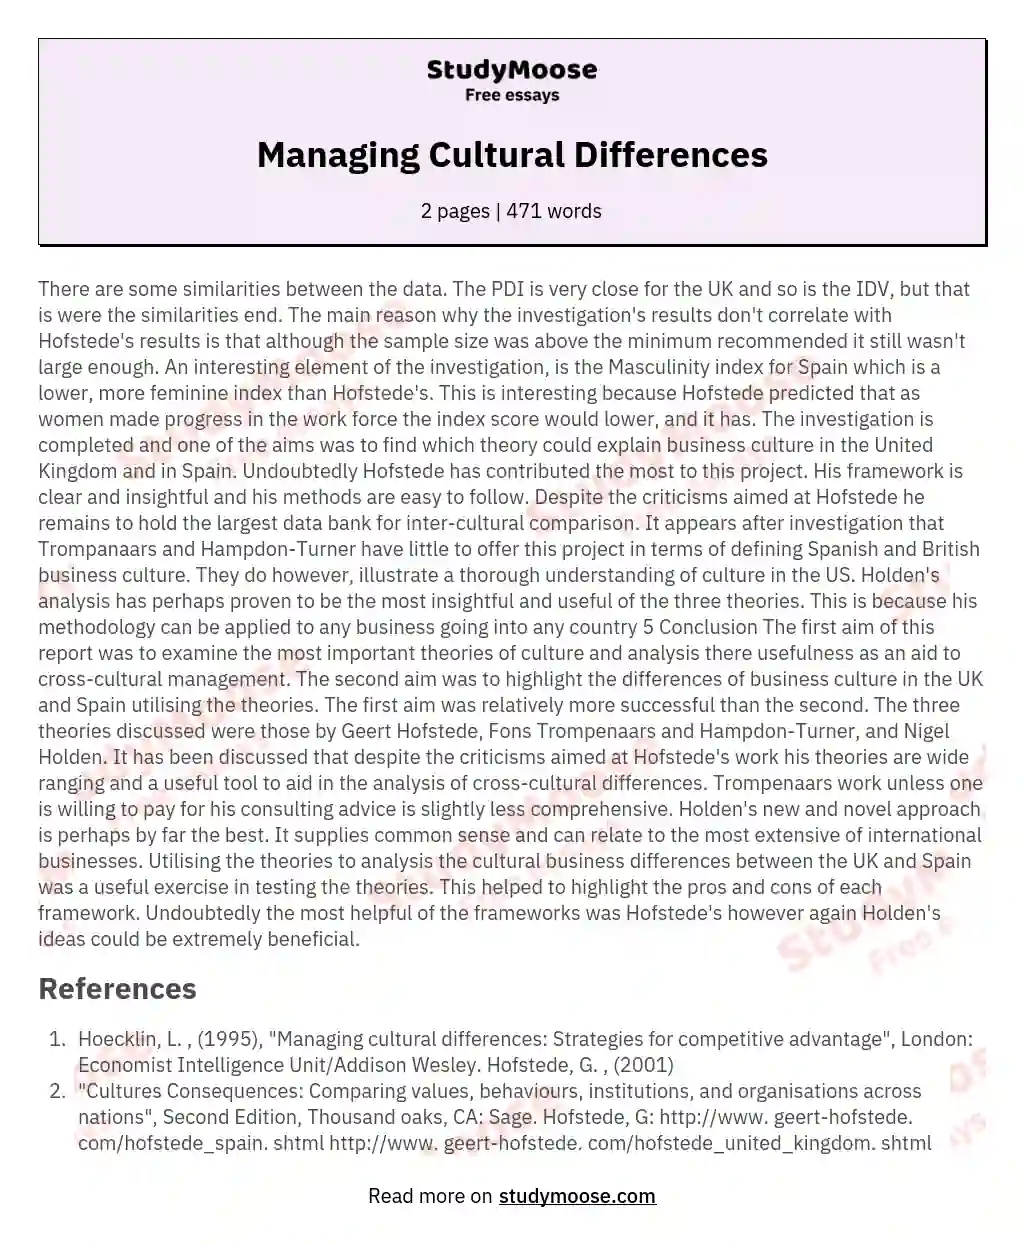 Managing Cultural Differences essay